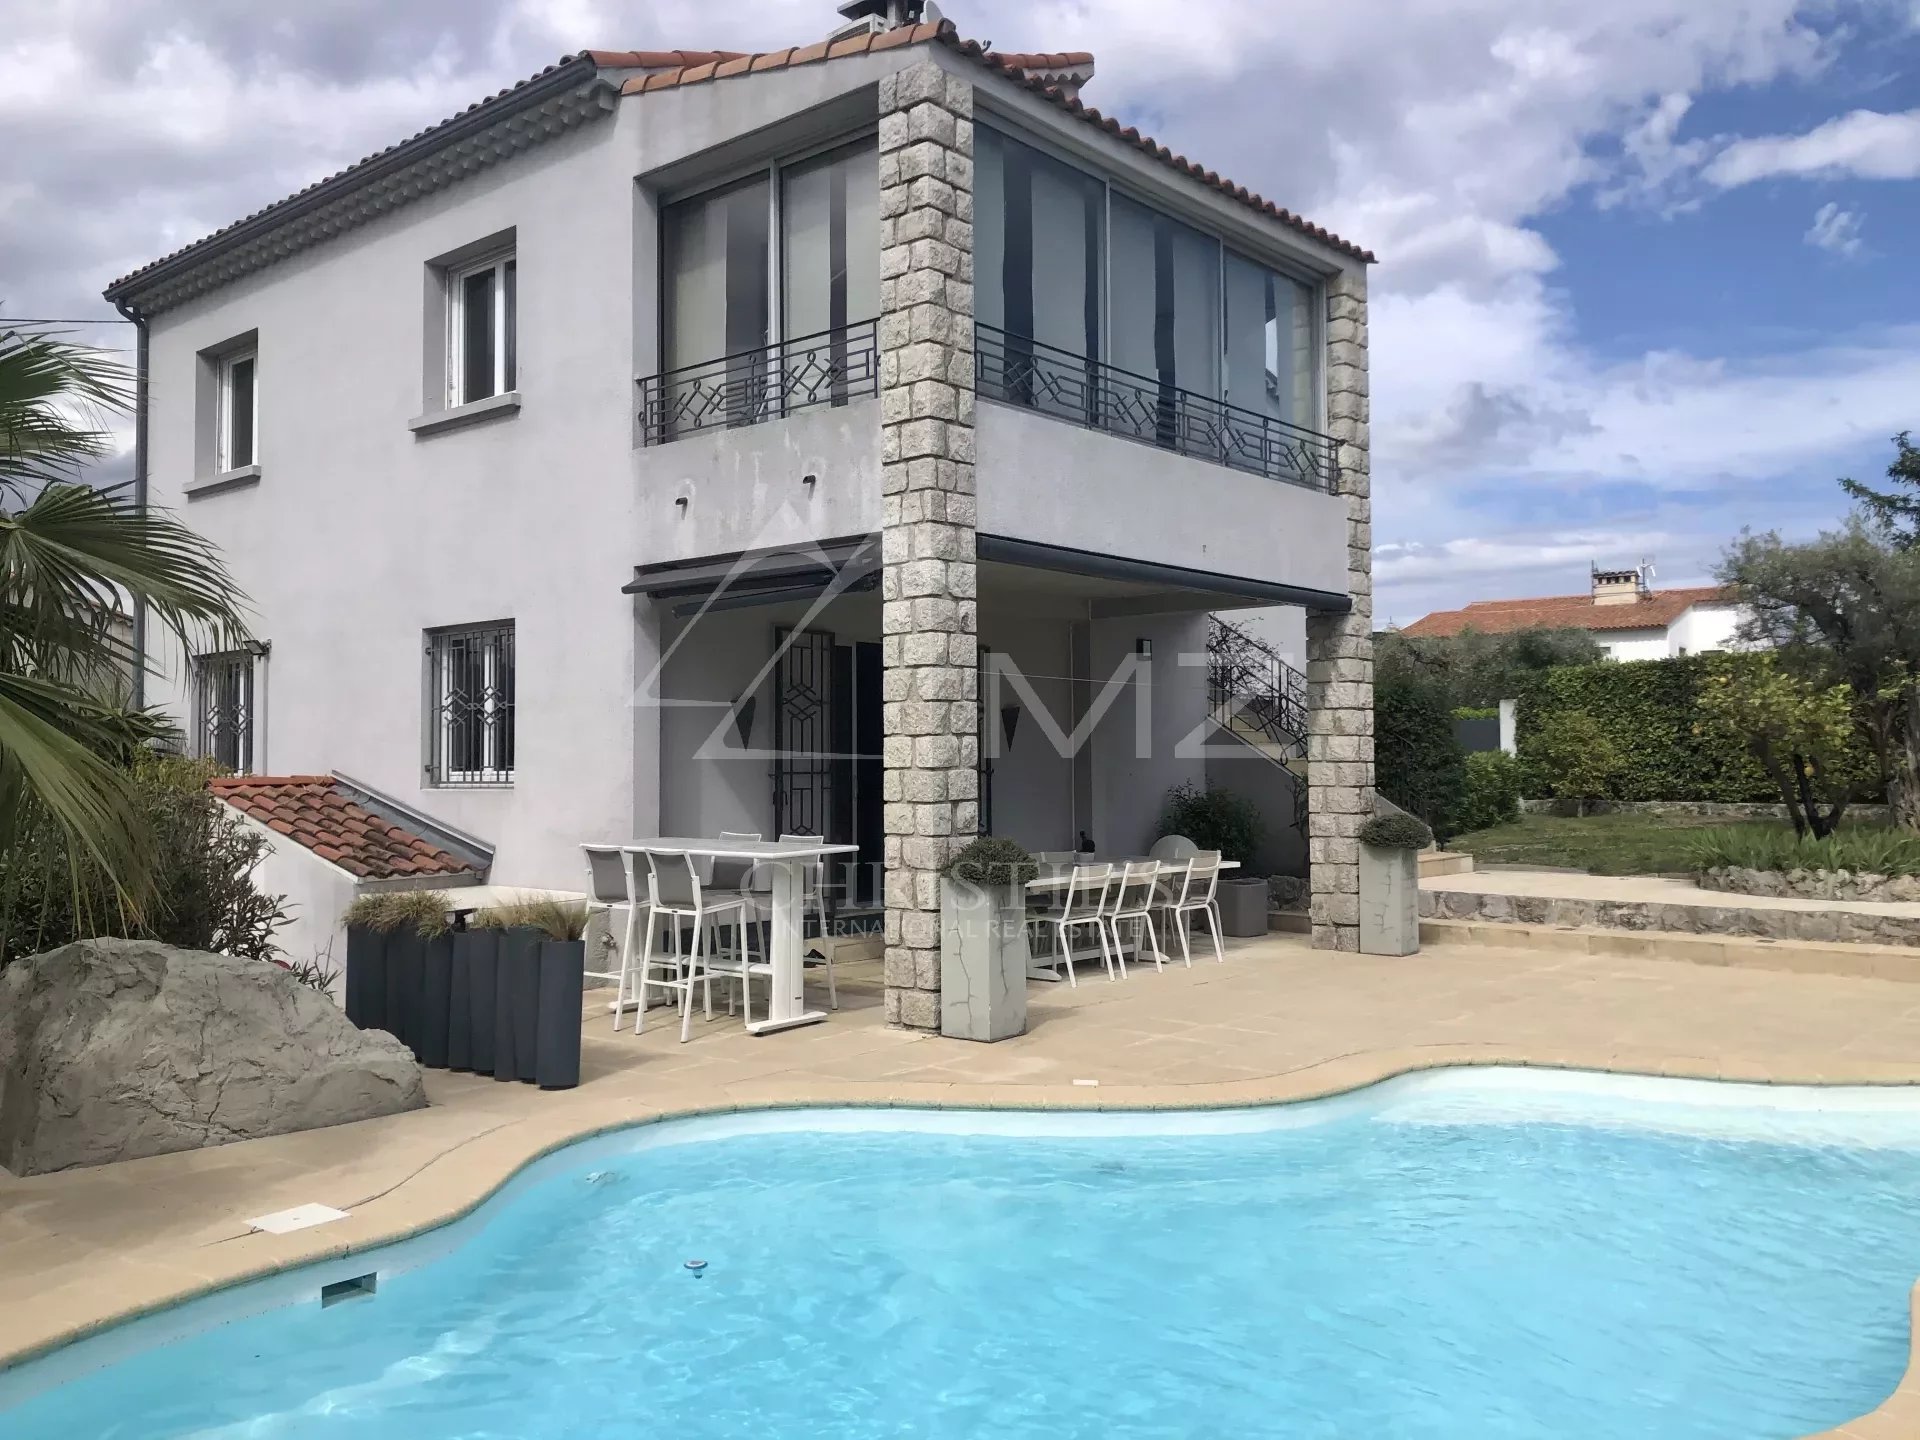 Near Cannes - Le Cannet - Family villa in a dominant position